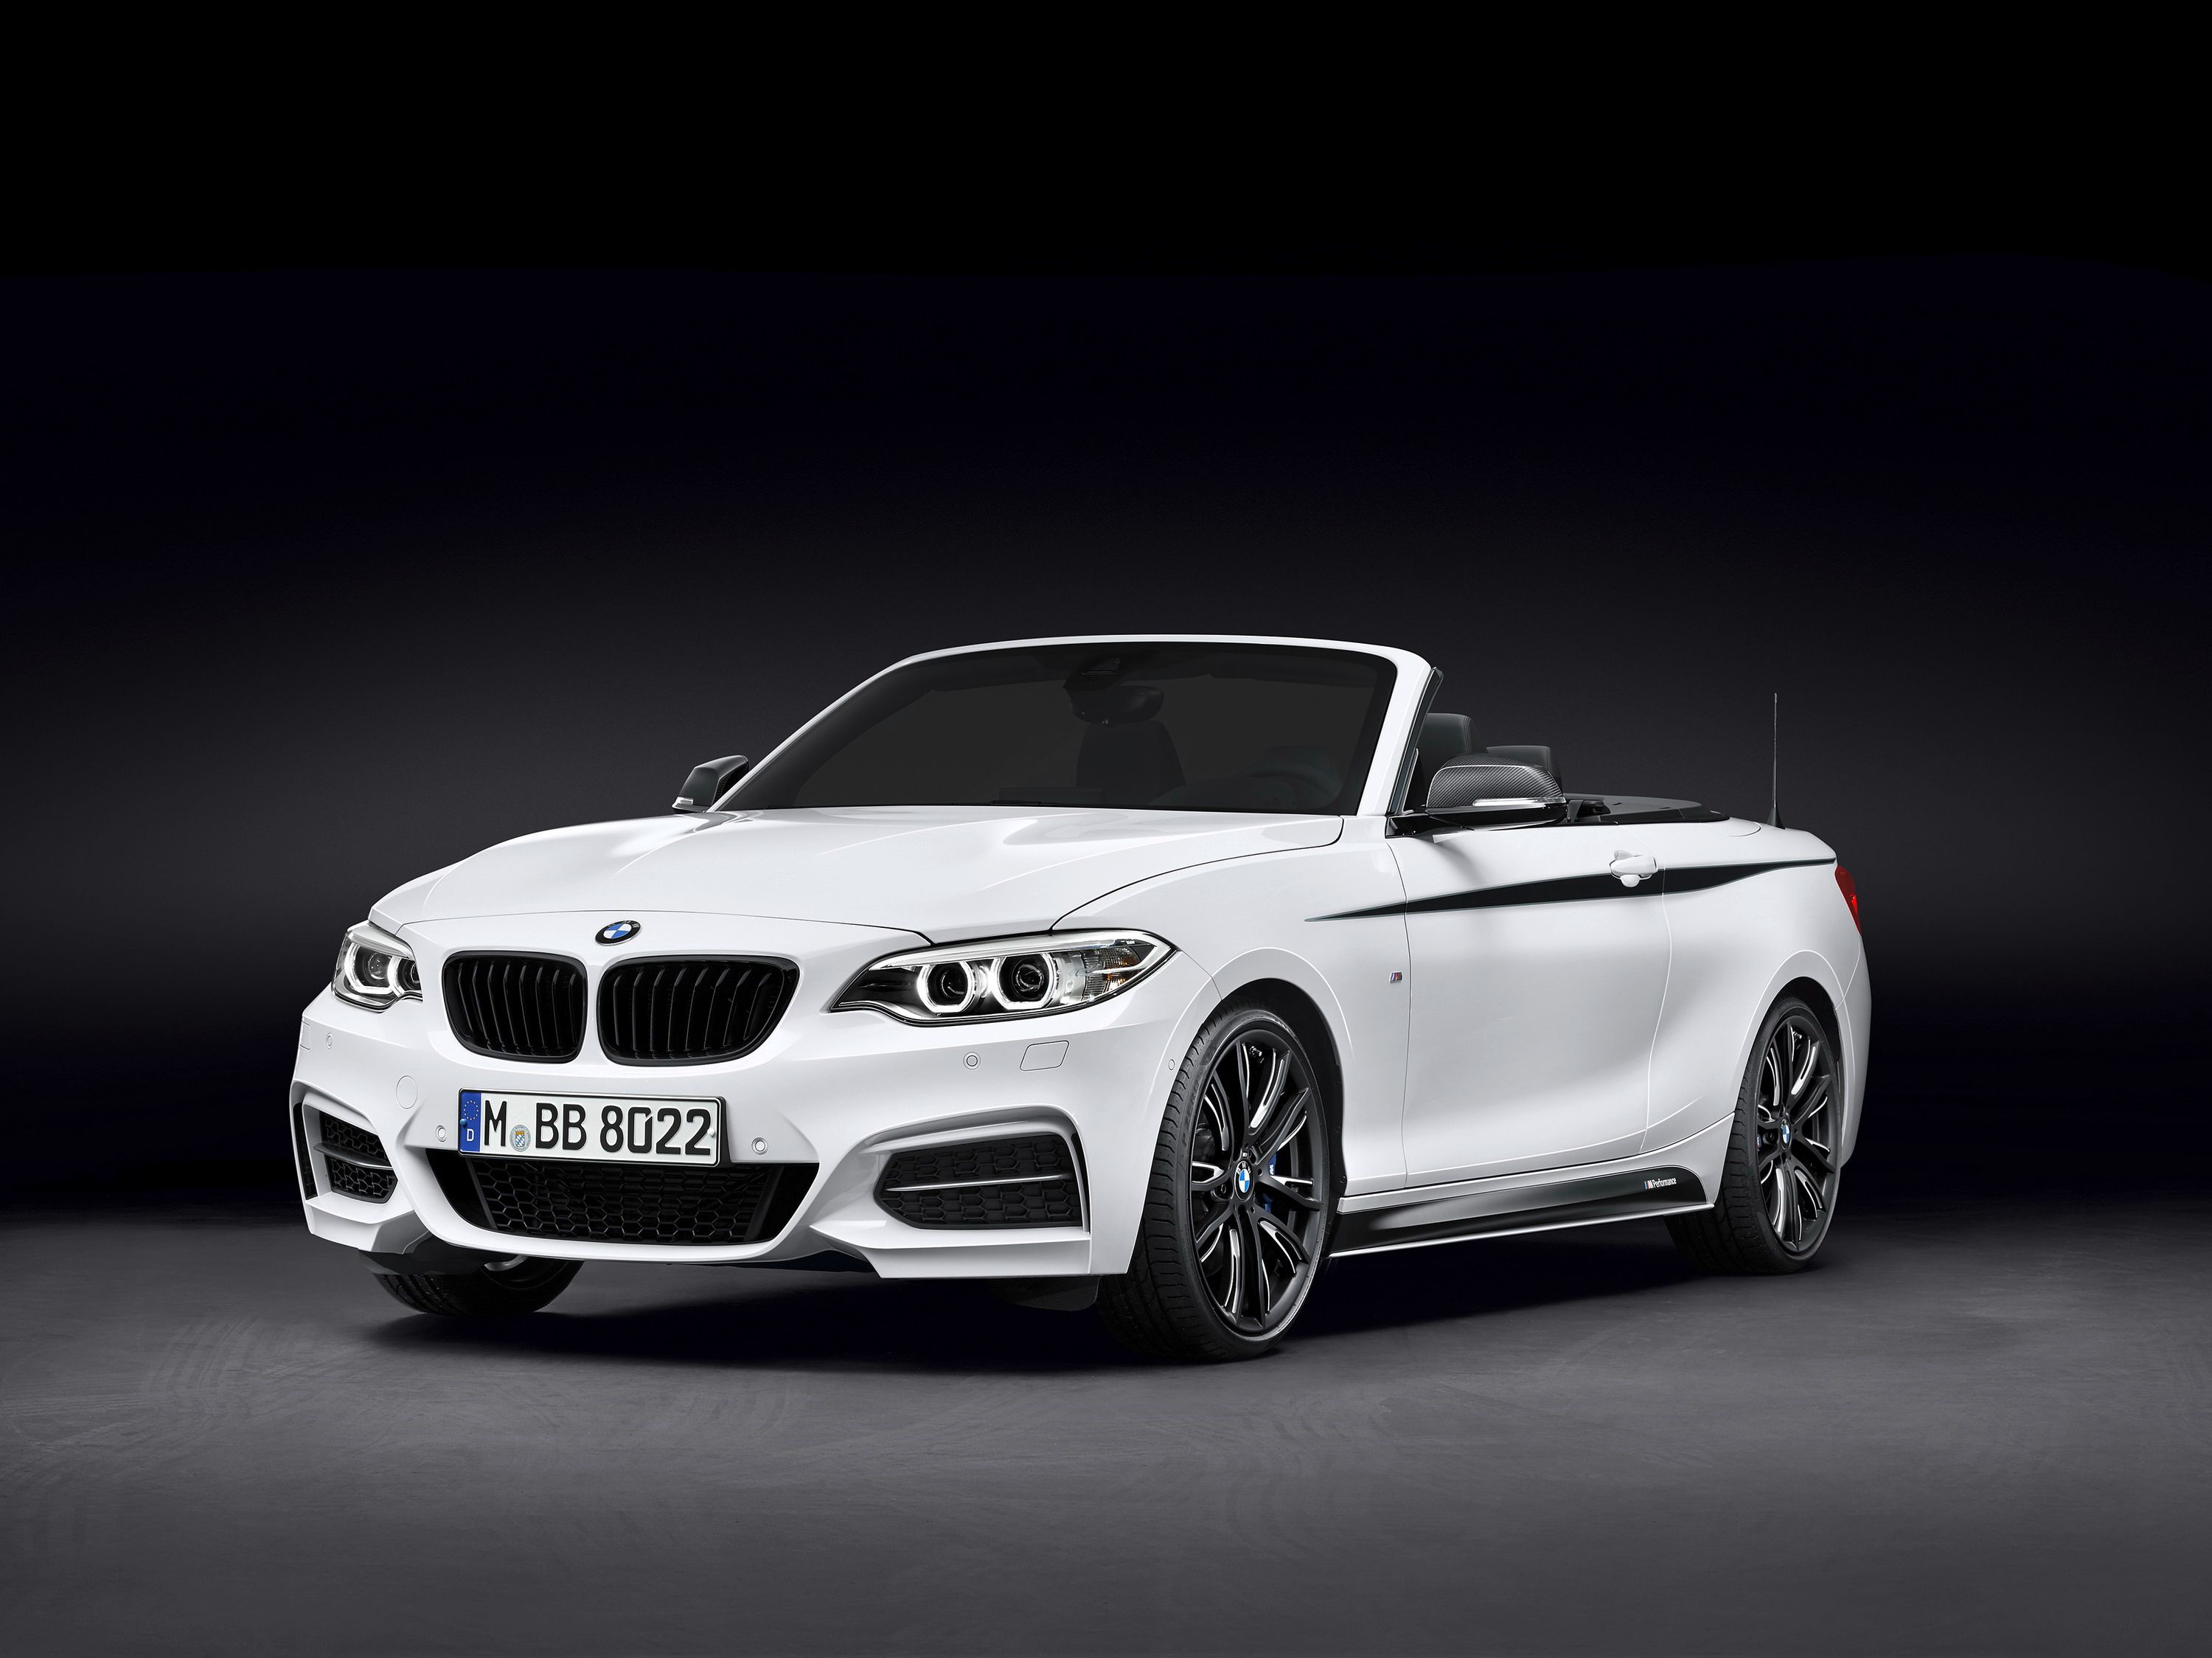 2015 BMW 220d Cabrio With M Performance Parts